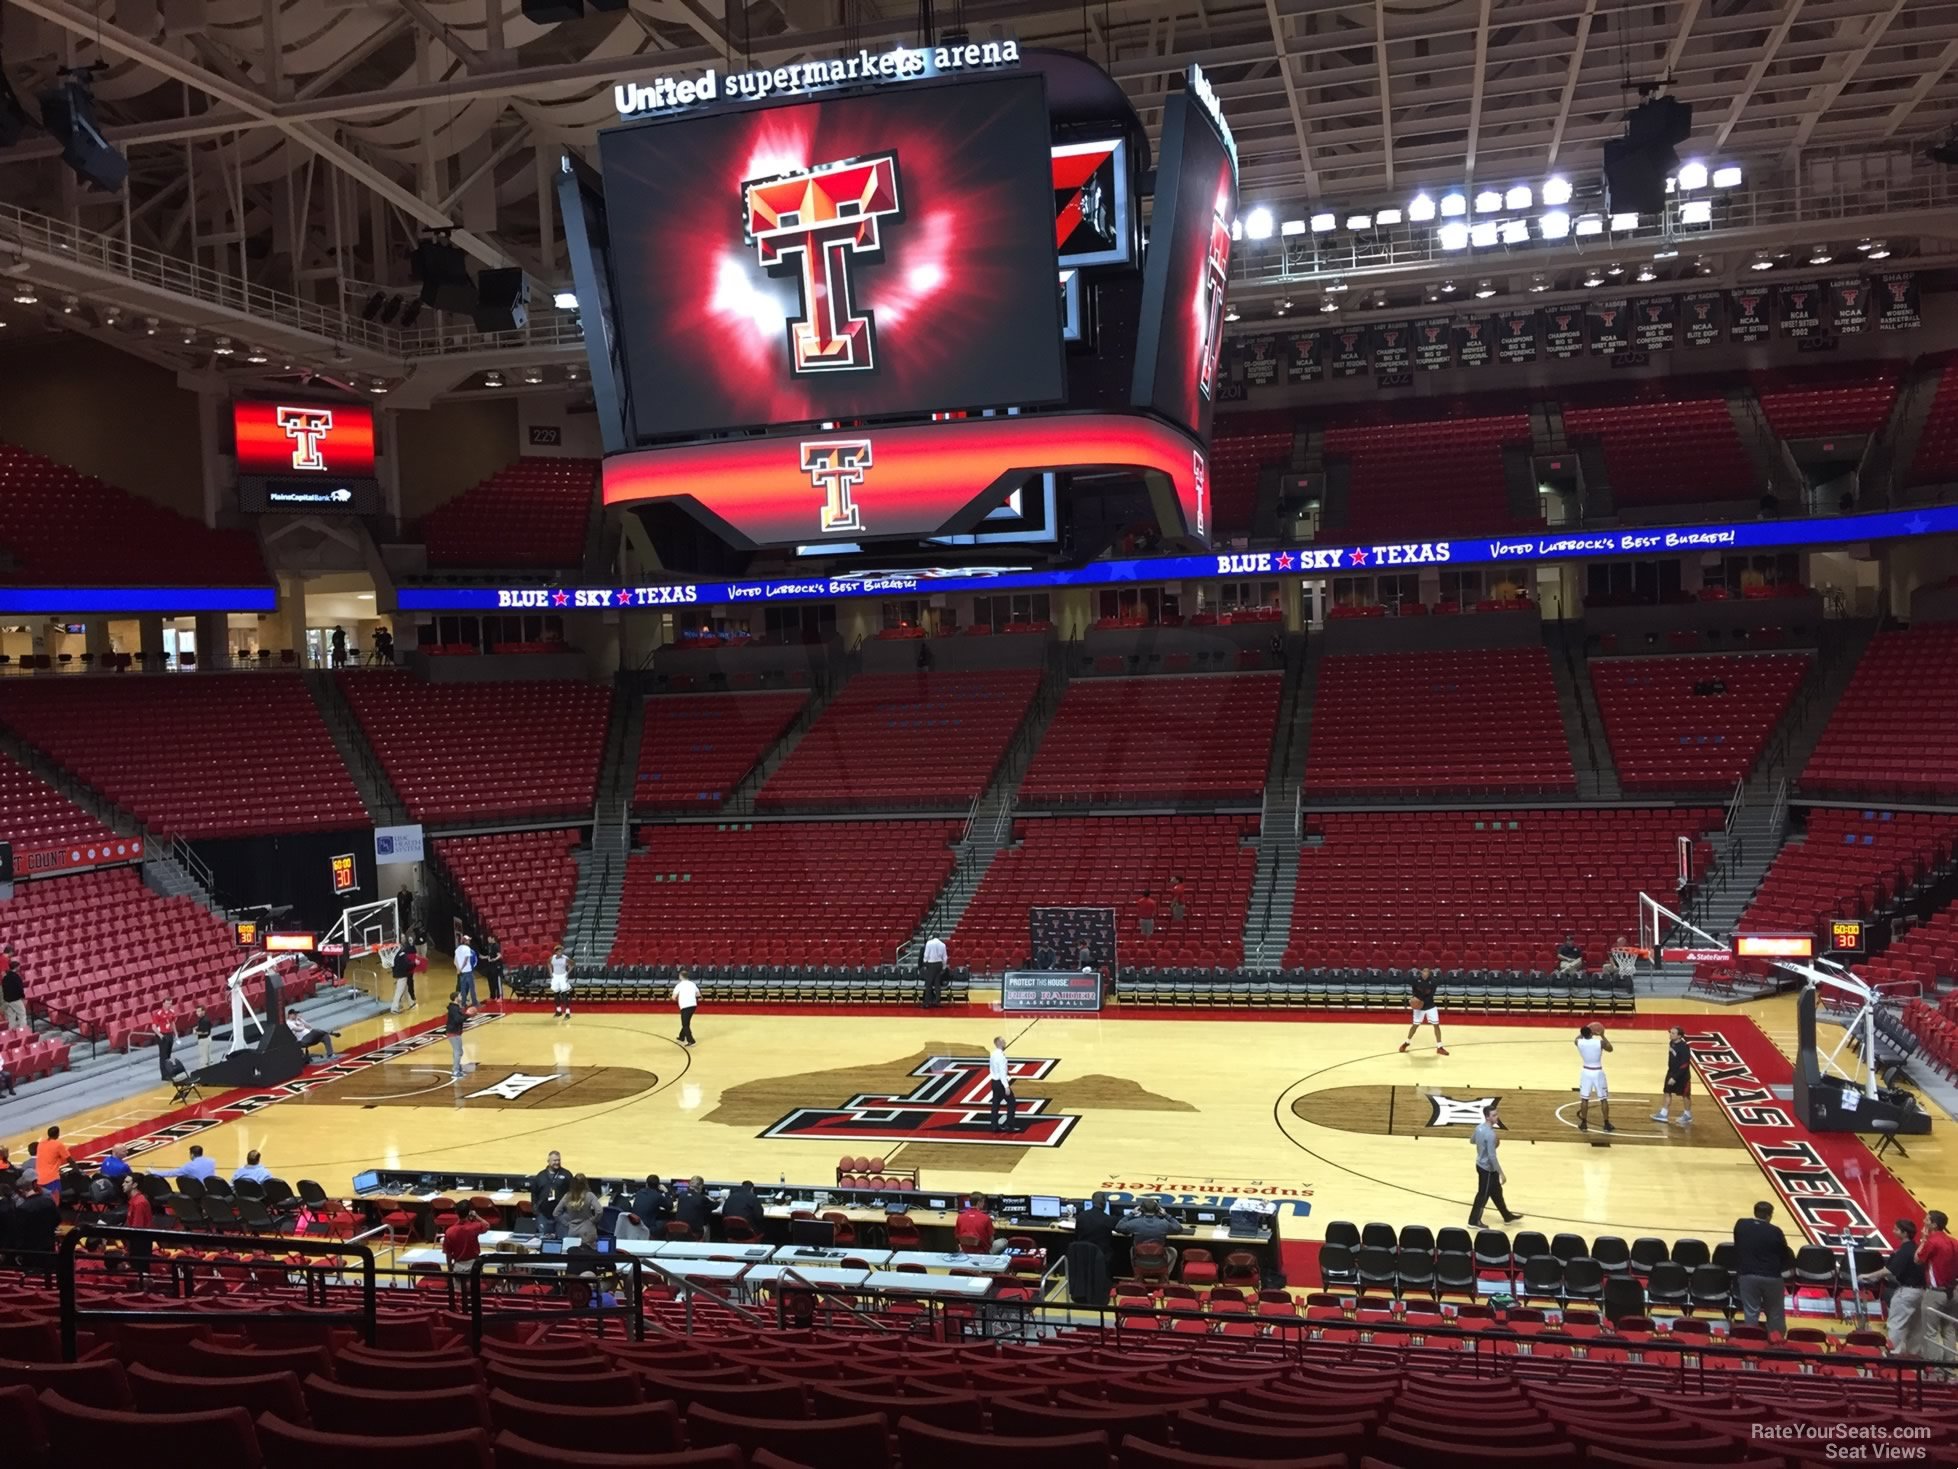 section 112, row 25 seat view  - united supermarkets arena